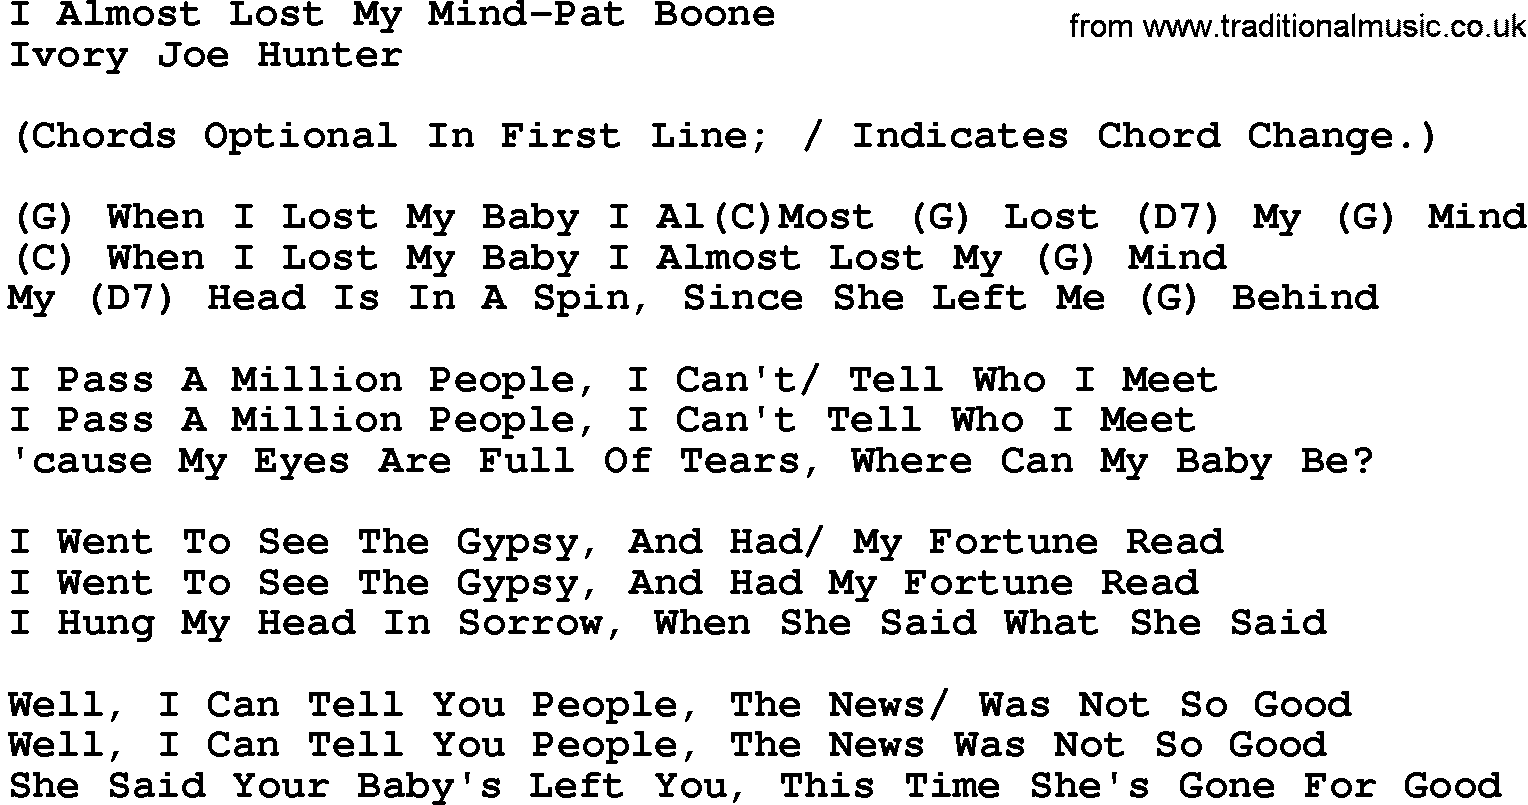 Country music song: I Almost Lost My Mind-Pat Boone lyrics and chords